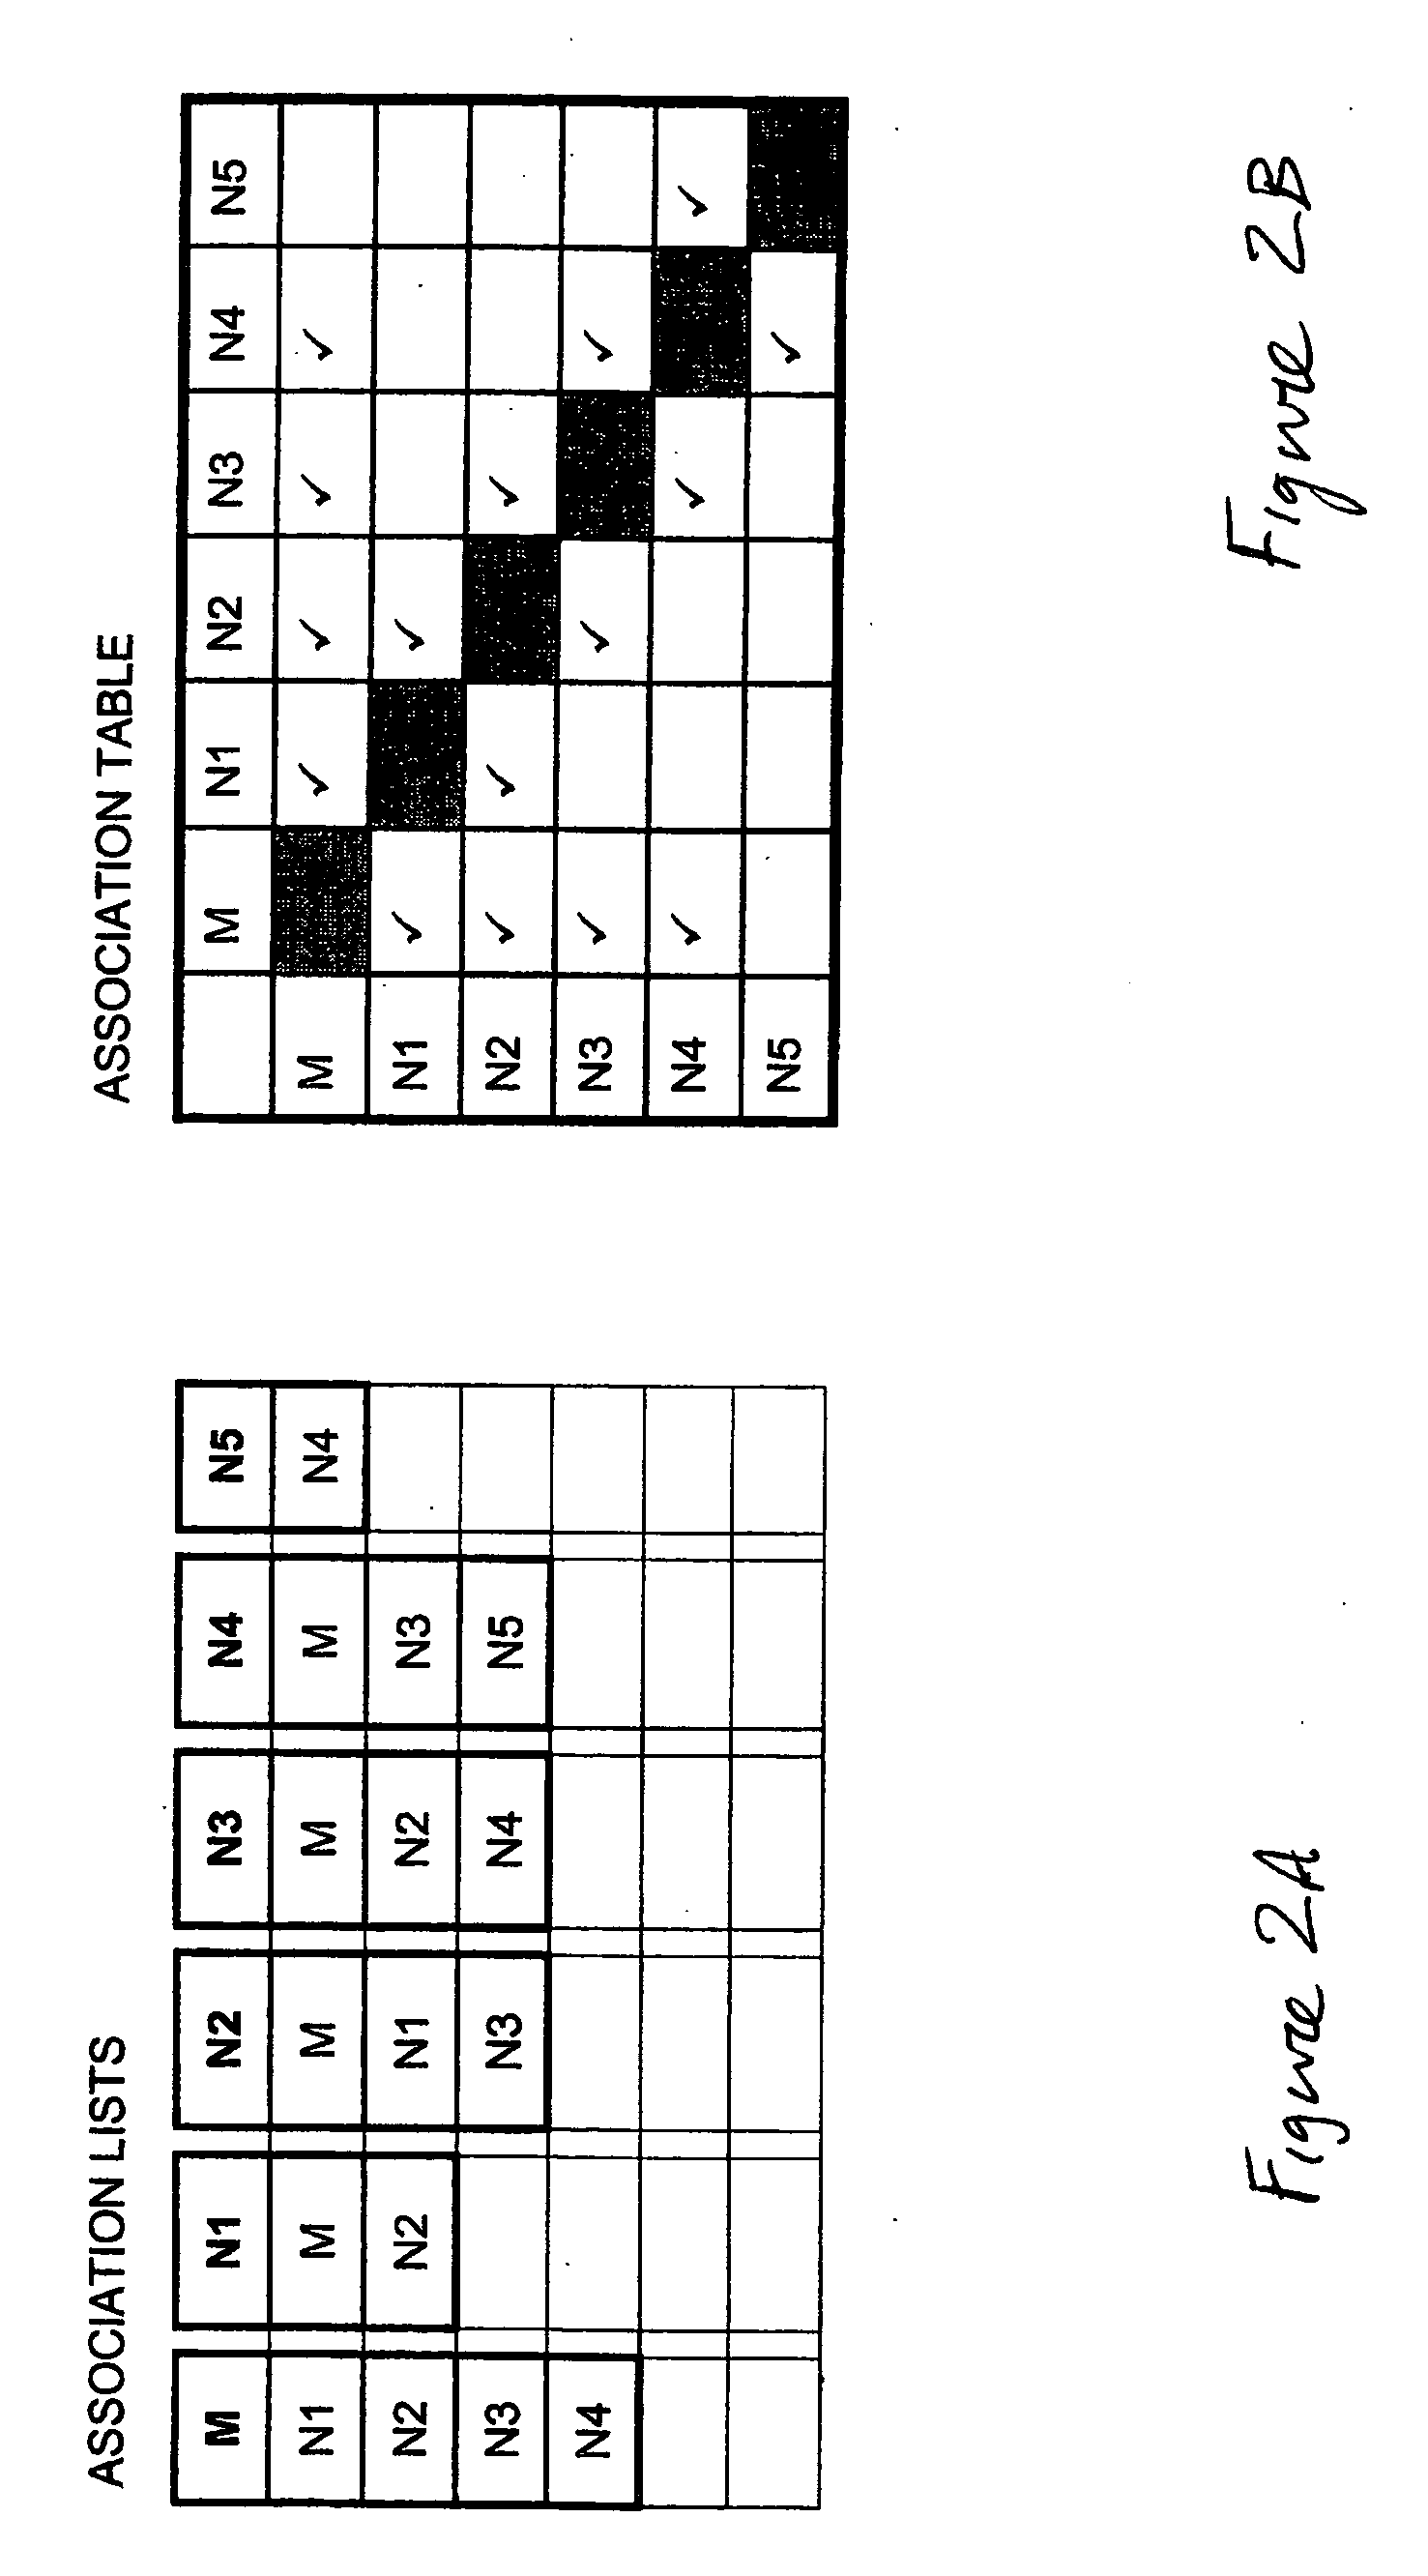 Radio frequency location determination system and method with wireless mesh sensor networks